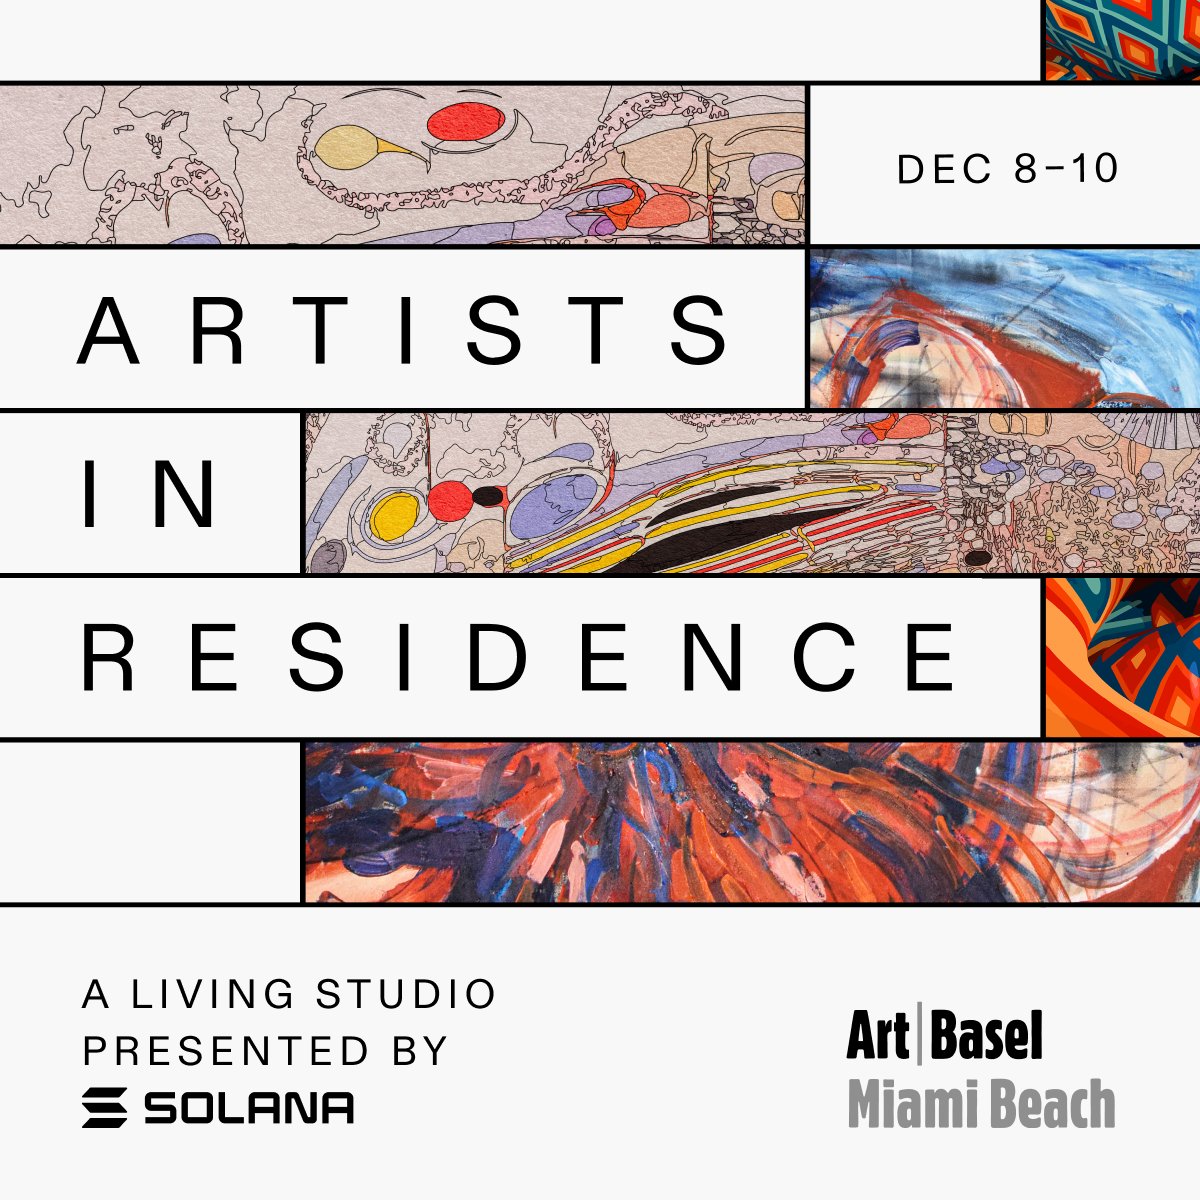 Gm fam let's start this week with some news!!! I’m excited to announce that I’ll be exhibiting my art at @ArtBasel Miami Beach on Dec. 8 - 10th! Along amazing artists @sleeprNFT and @Eko3316 being part of the @solana Artists in Residence Art Basel is a goal for every…